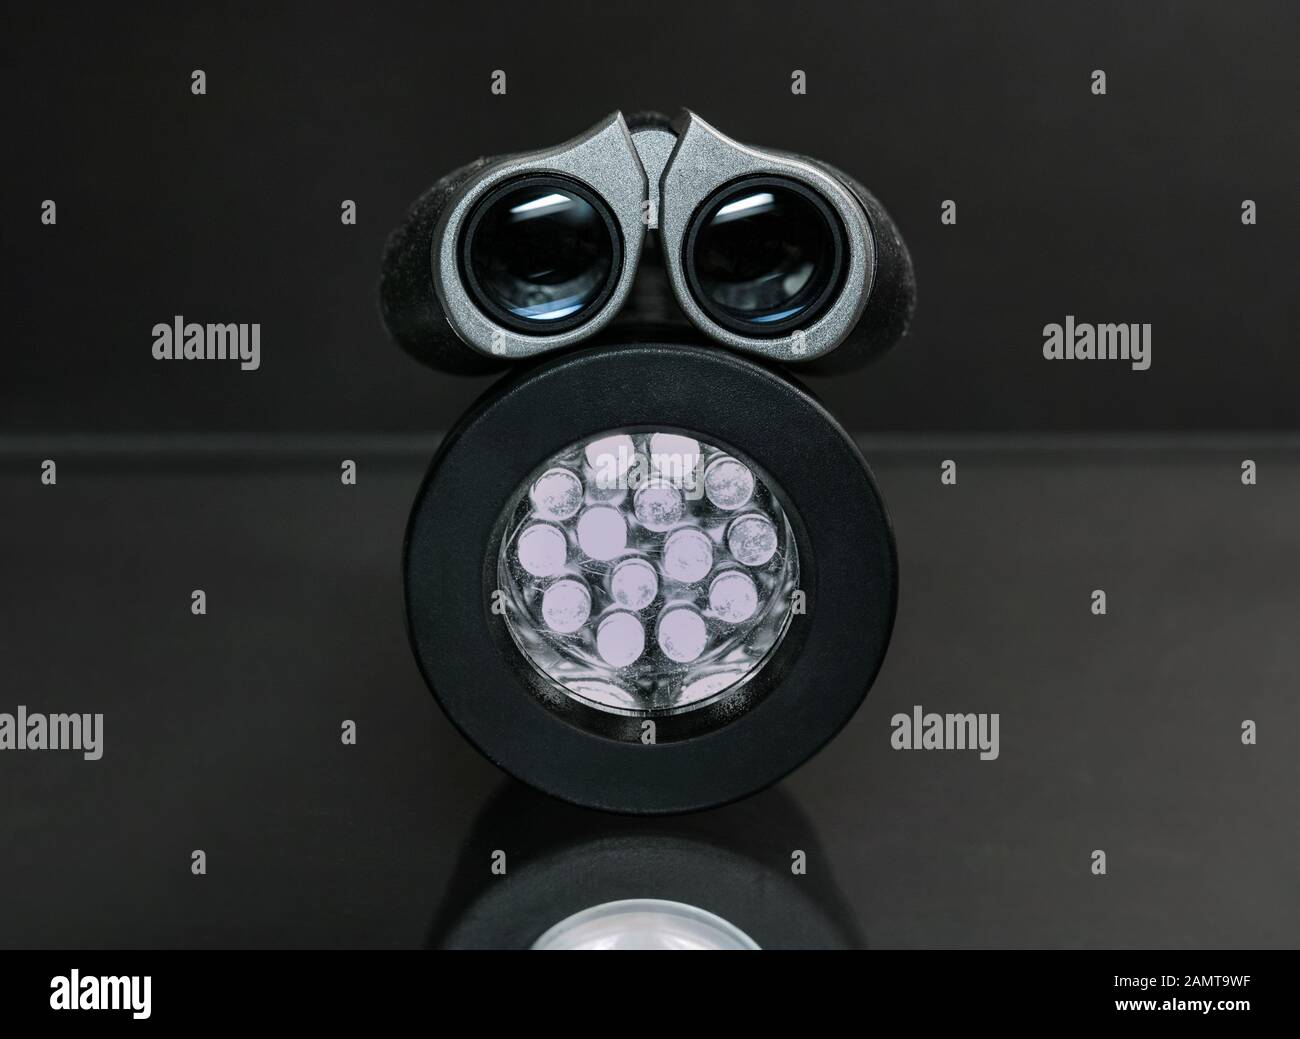 Binoculars on top of a torch: a sinister 'thing'... Stock Photo